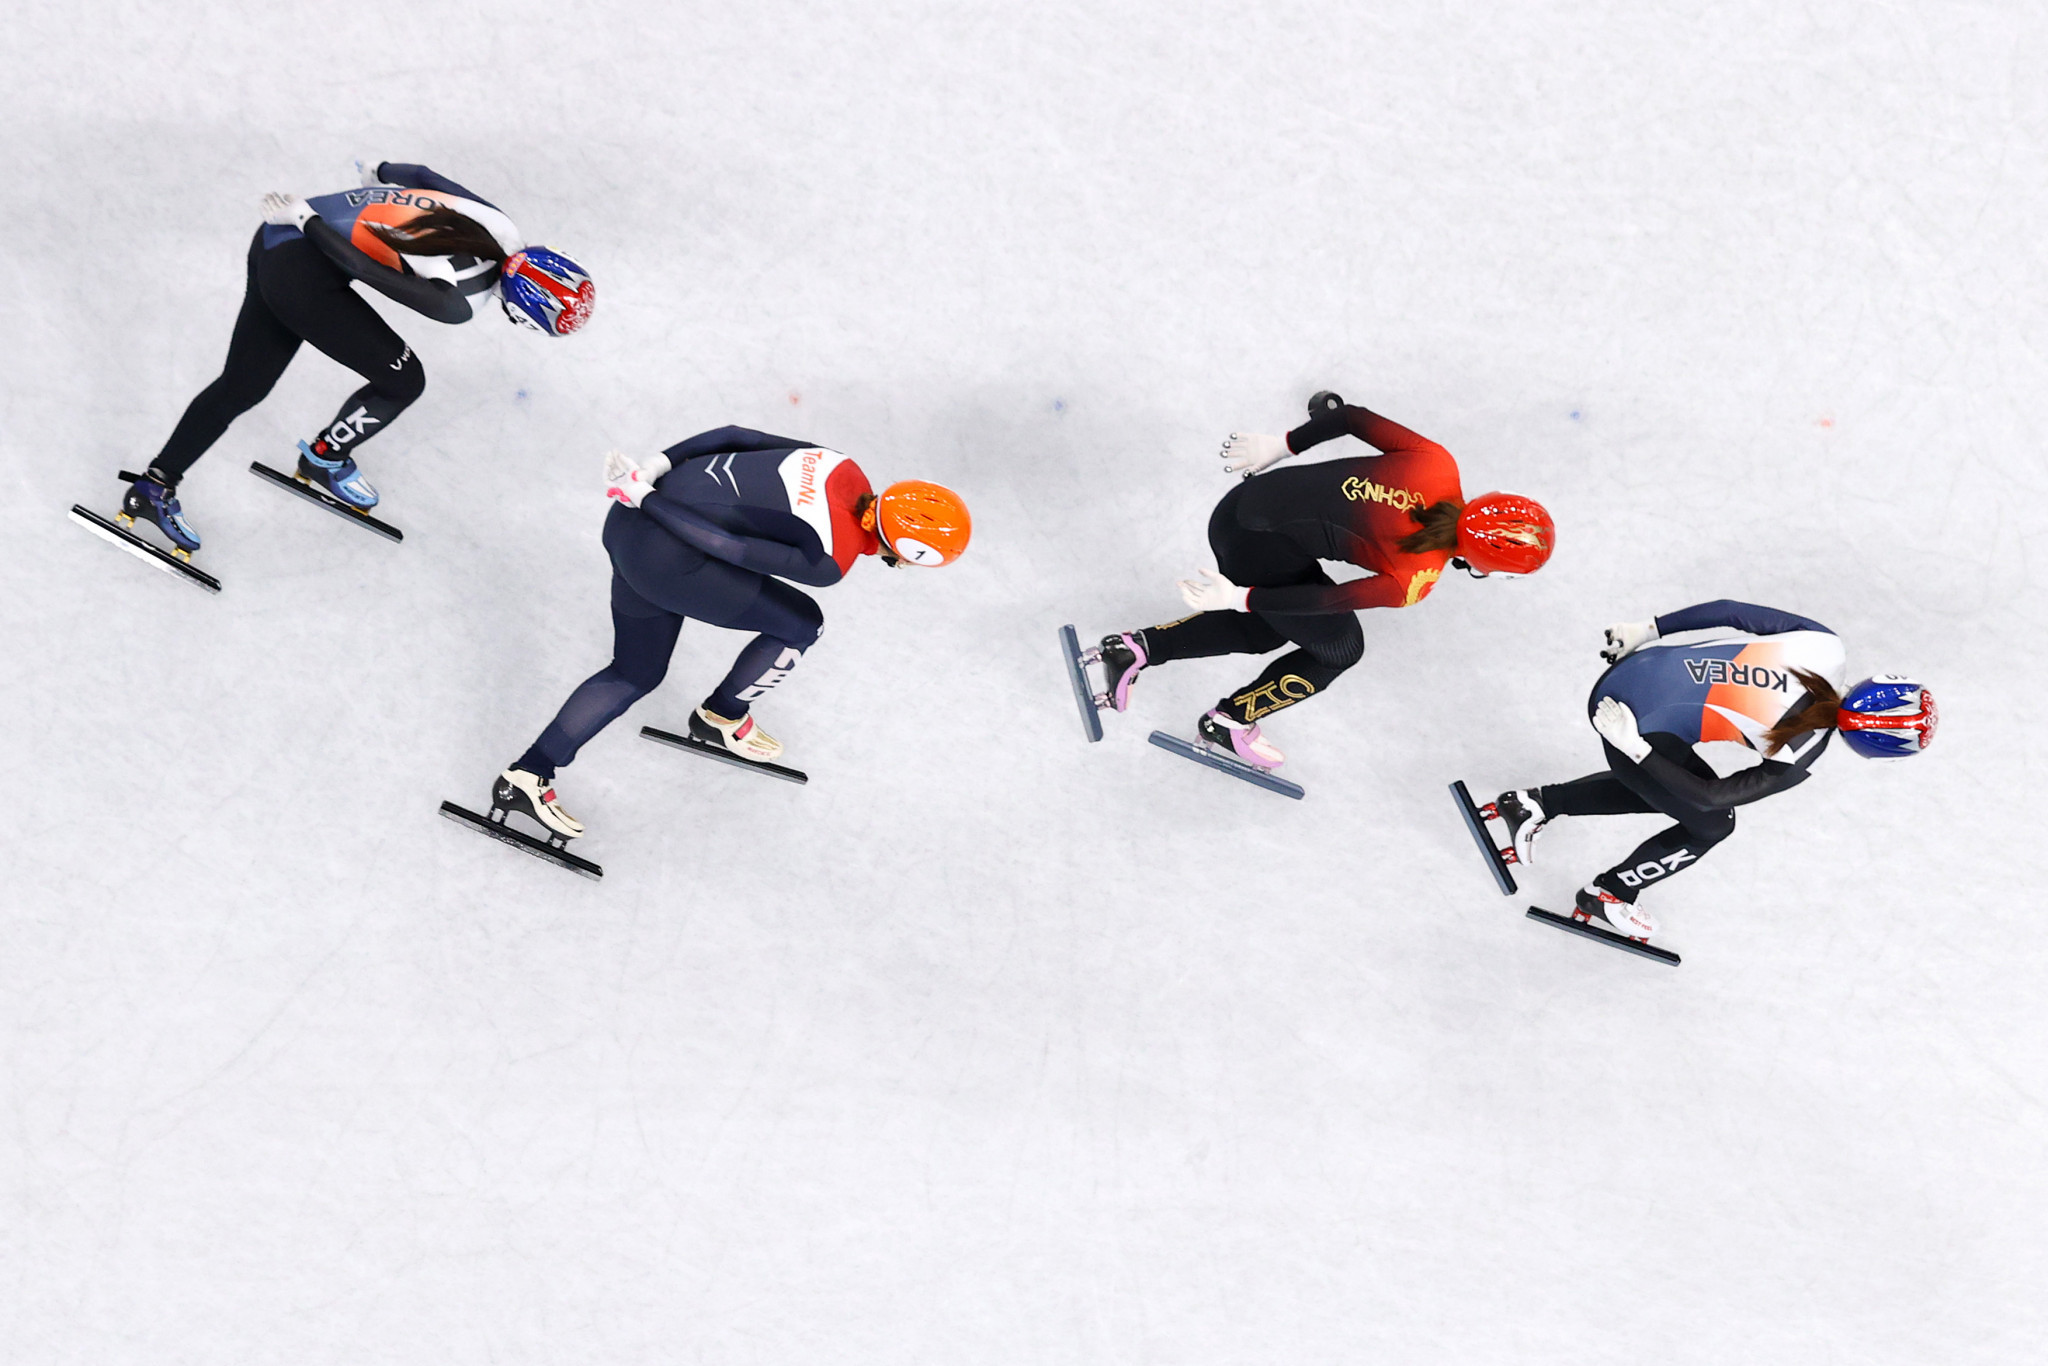 Choi wins last short track gold of Beijing 2022 as South Korea go out on a high